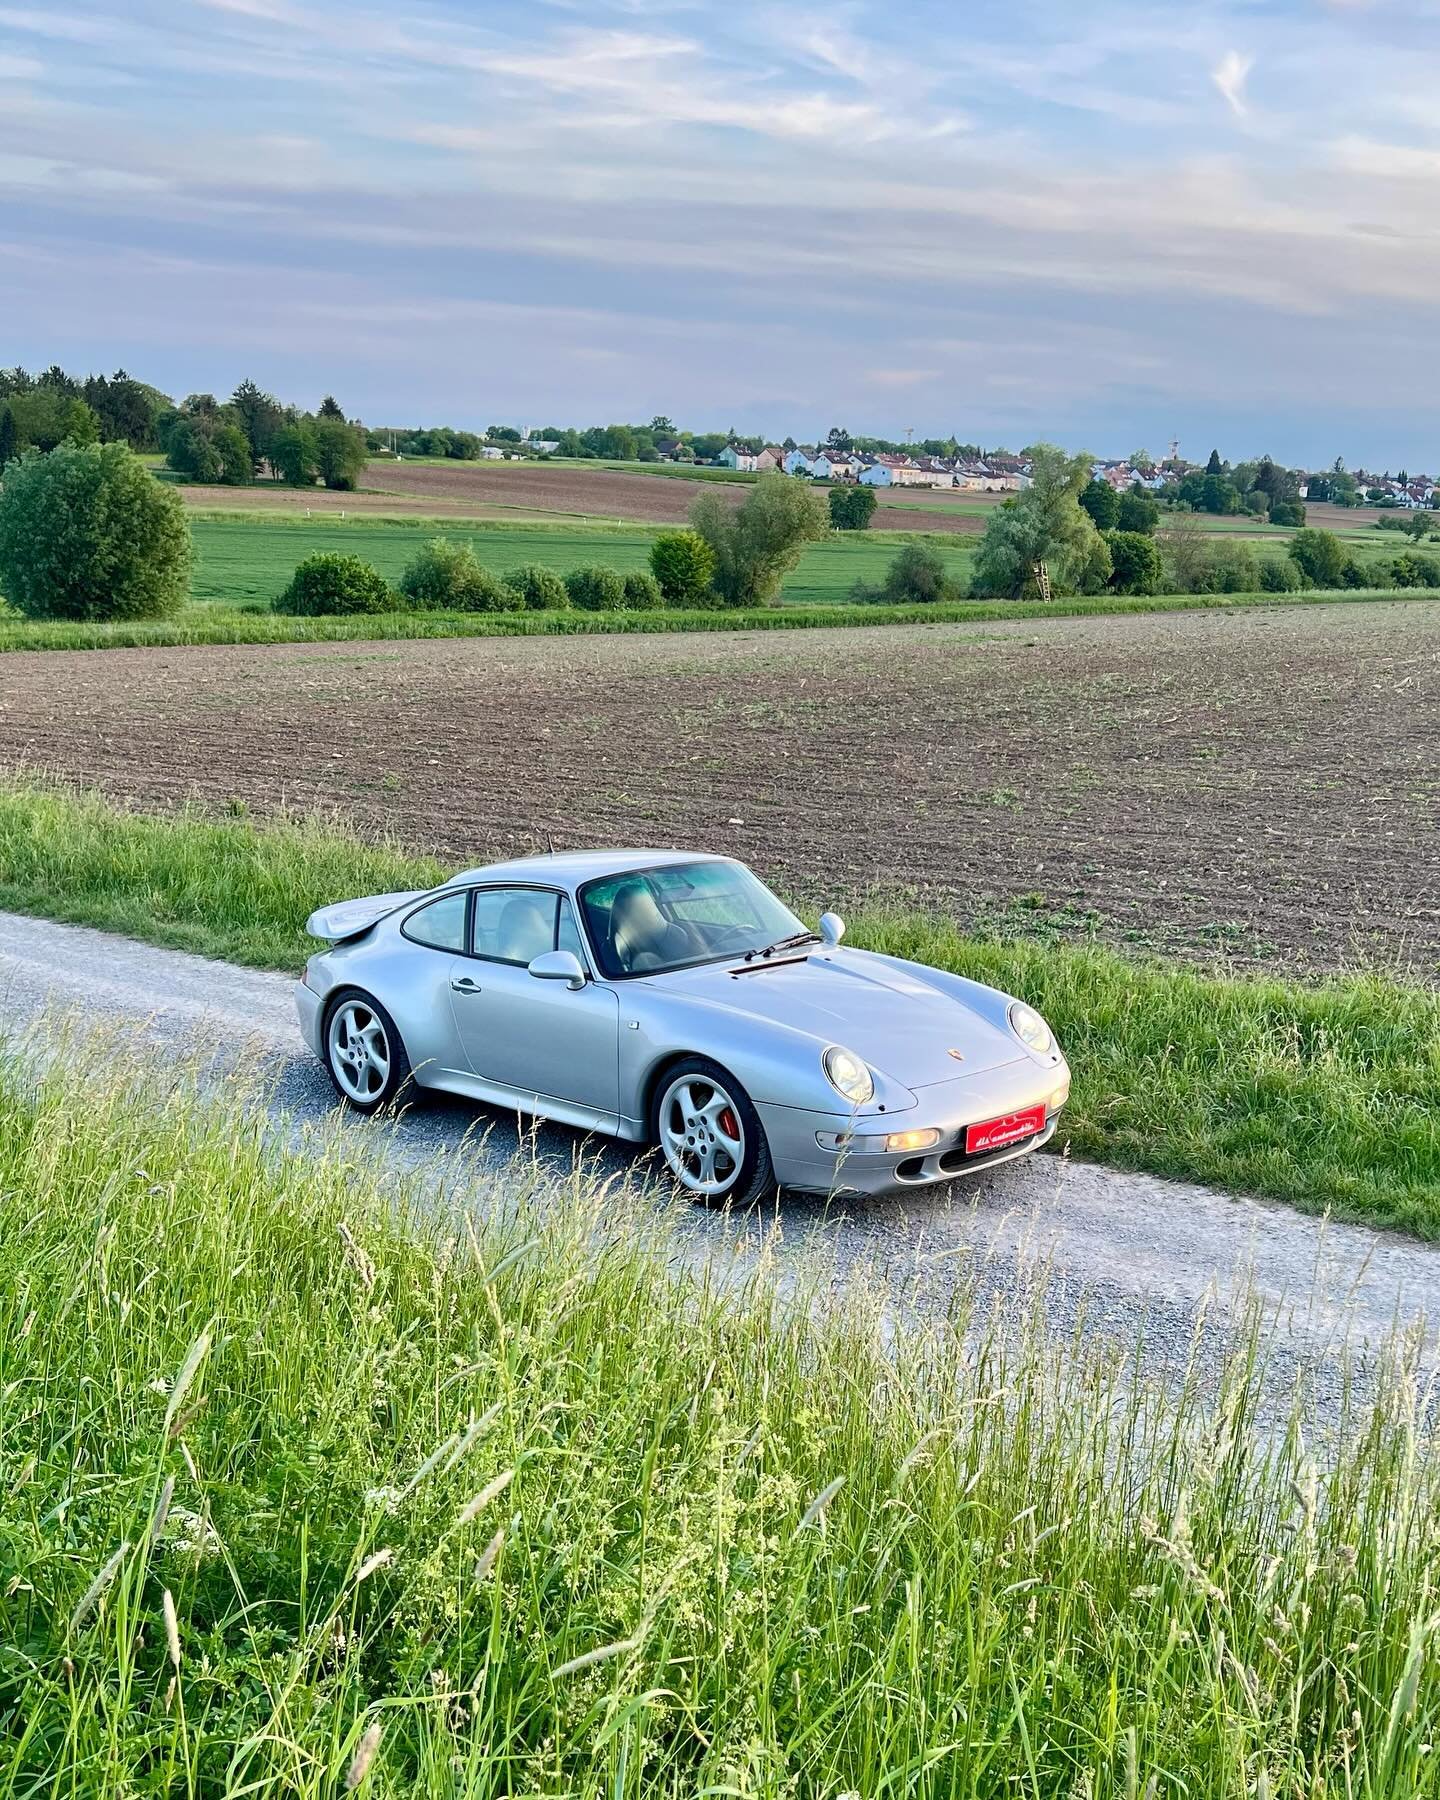 Porsche 993 Turbo WLS2, arctic silver metallic| leather black, first delivered to D&uuml;sseldorf/ Germany in April 1998, free of accidents, complete service book, in original condition, no sunroof...&thinsp;
&thinsp;
This Turbo not only looks incred